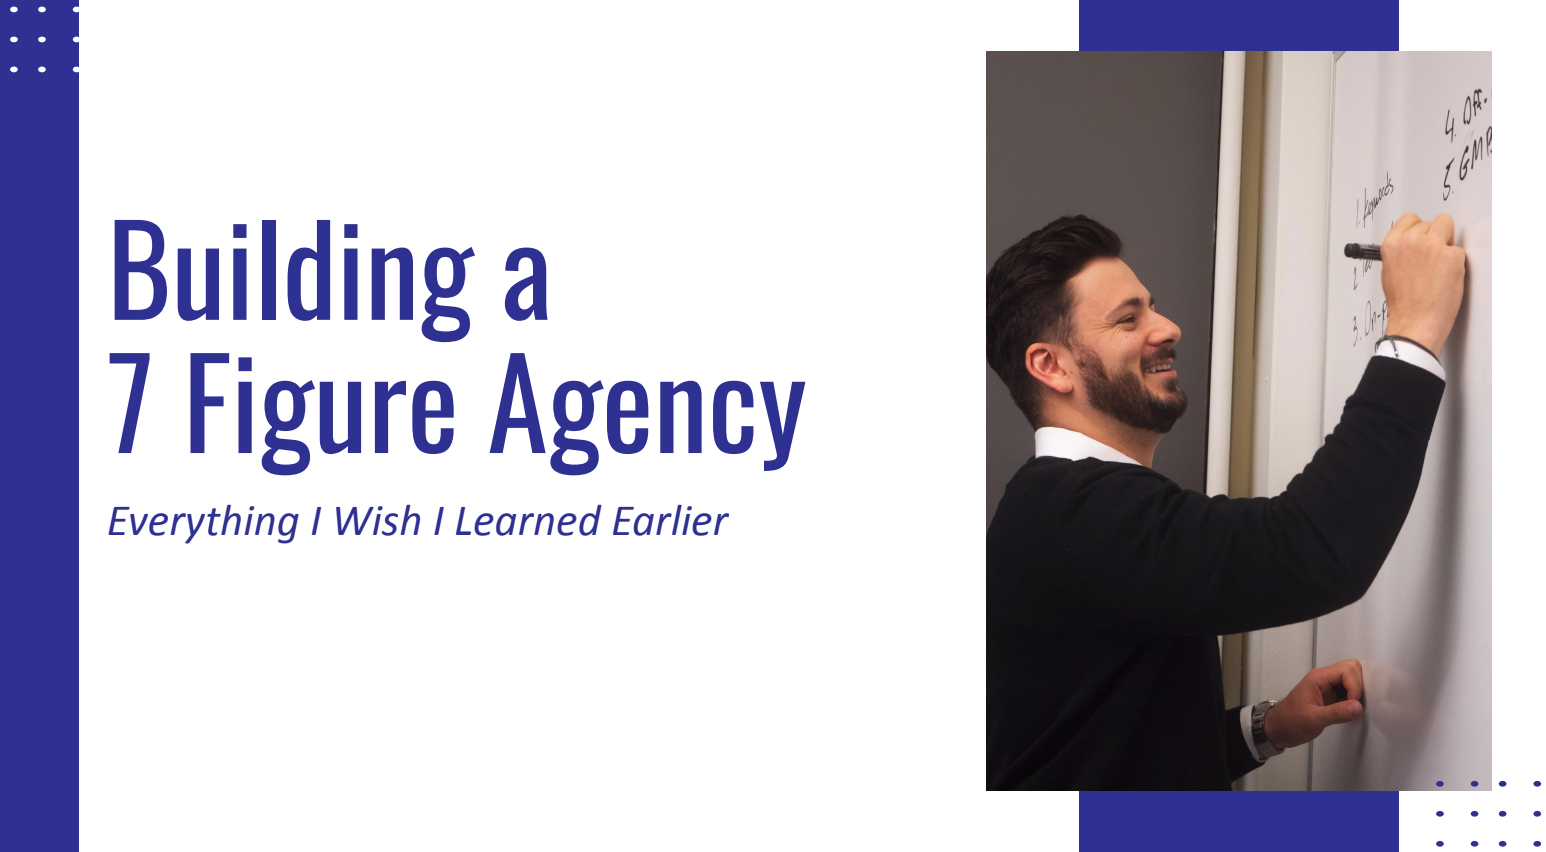 Building A 7 Figure Agency - Everything I Wish I Learned Earlier - Jacob Kettner